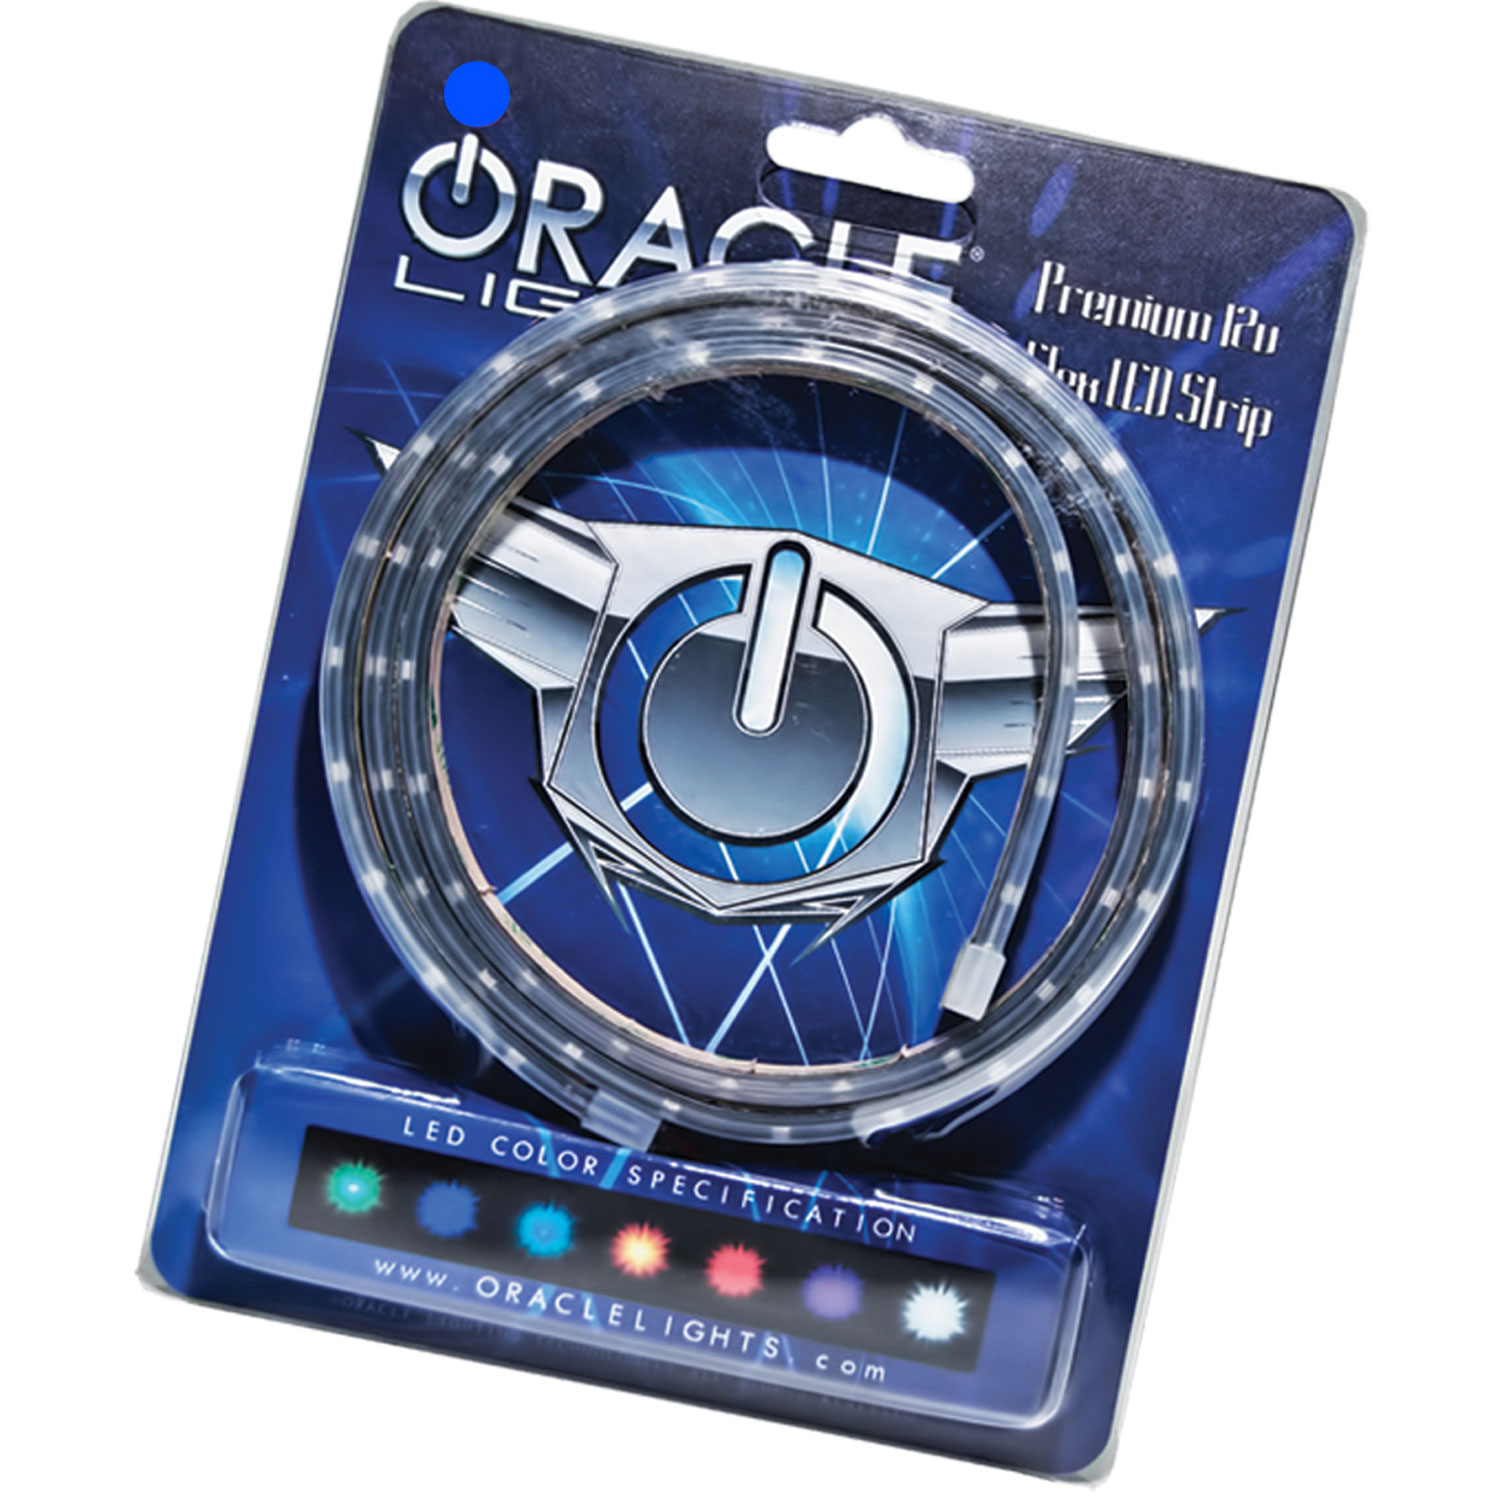 ORACLE 36 LED Retail Pack - Blue